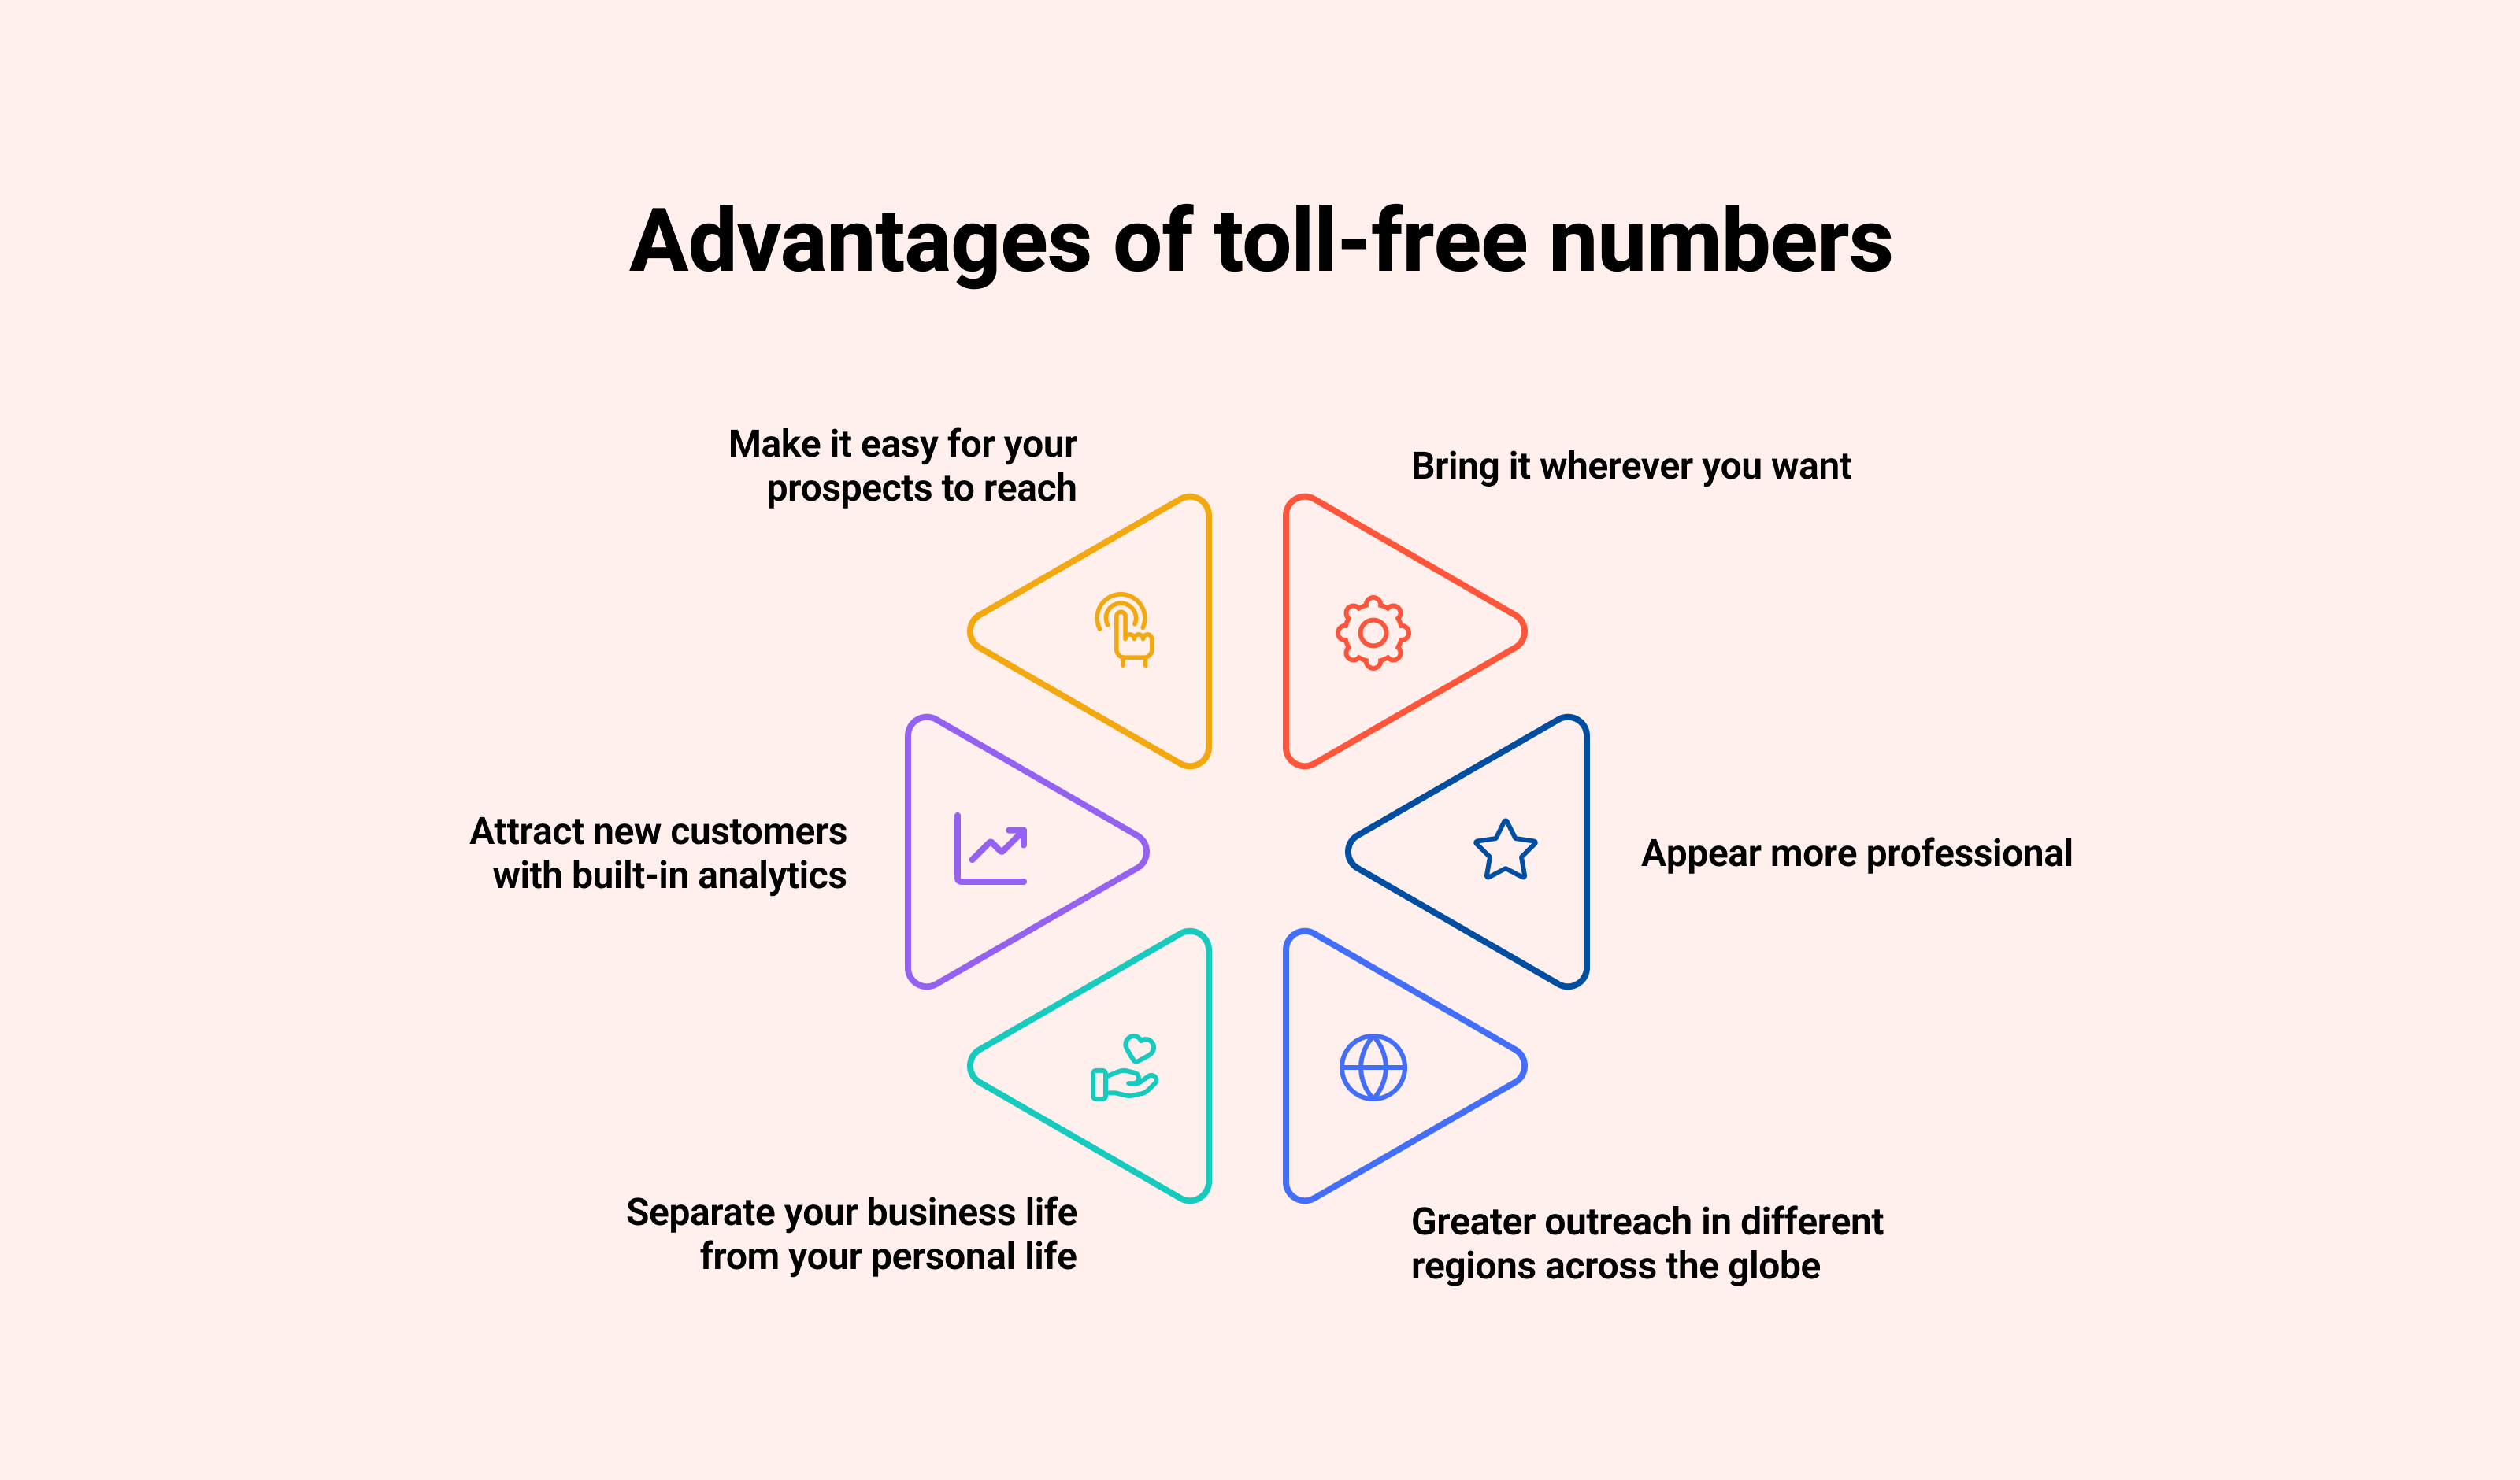 Advantages of toll-free numbers: